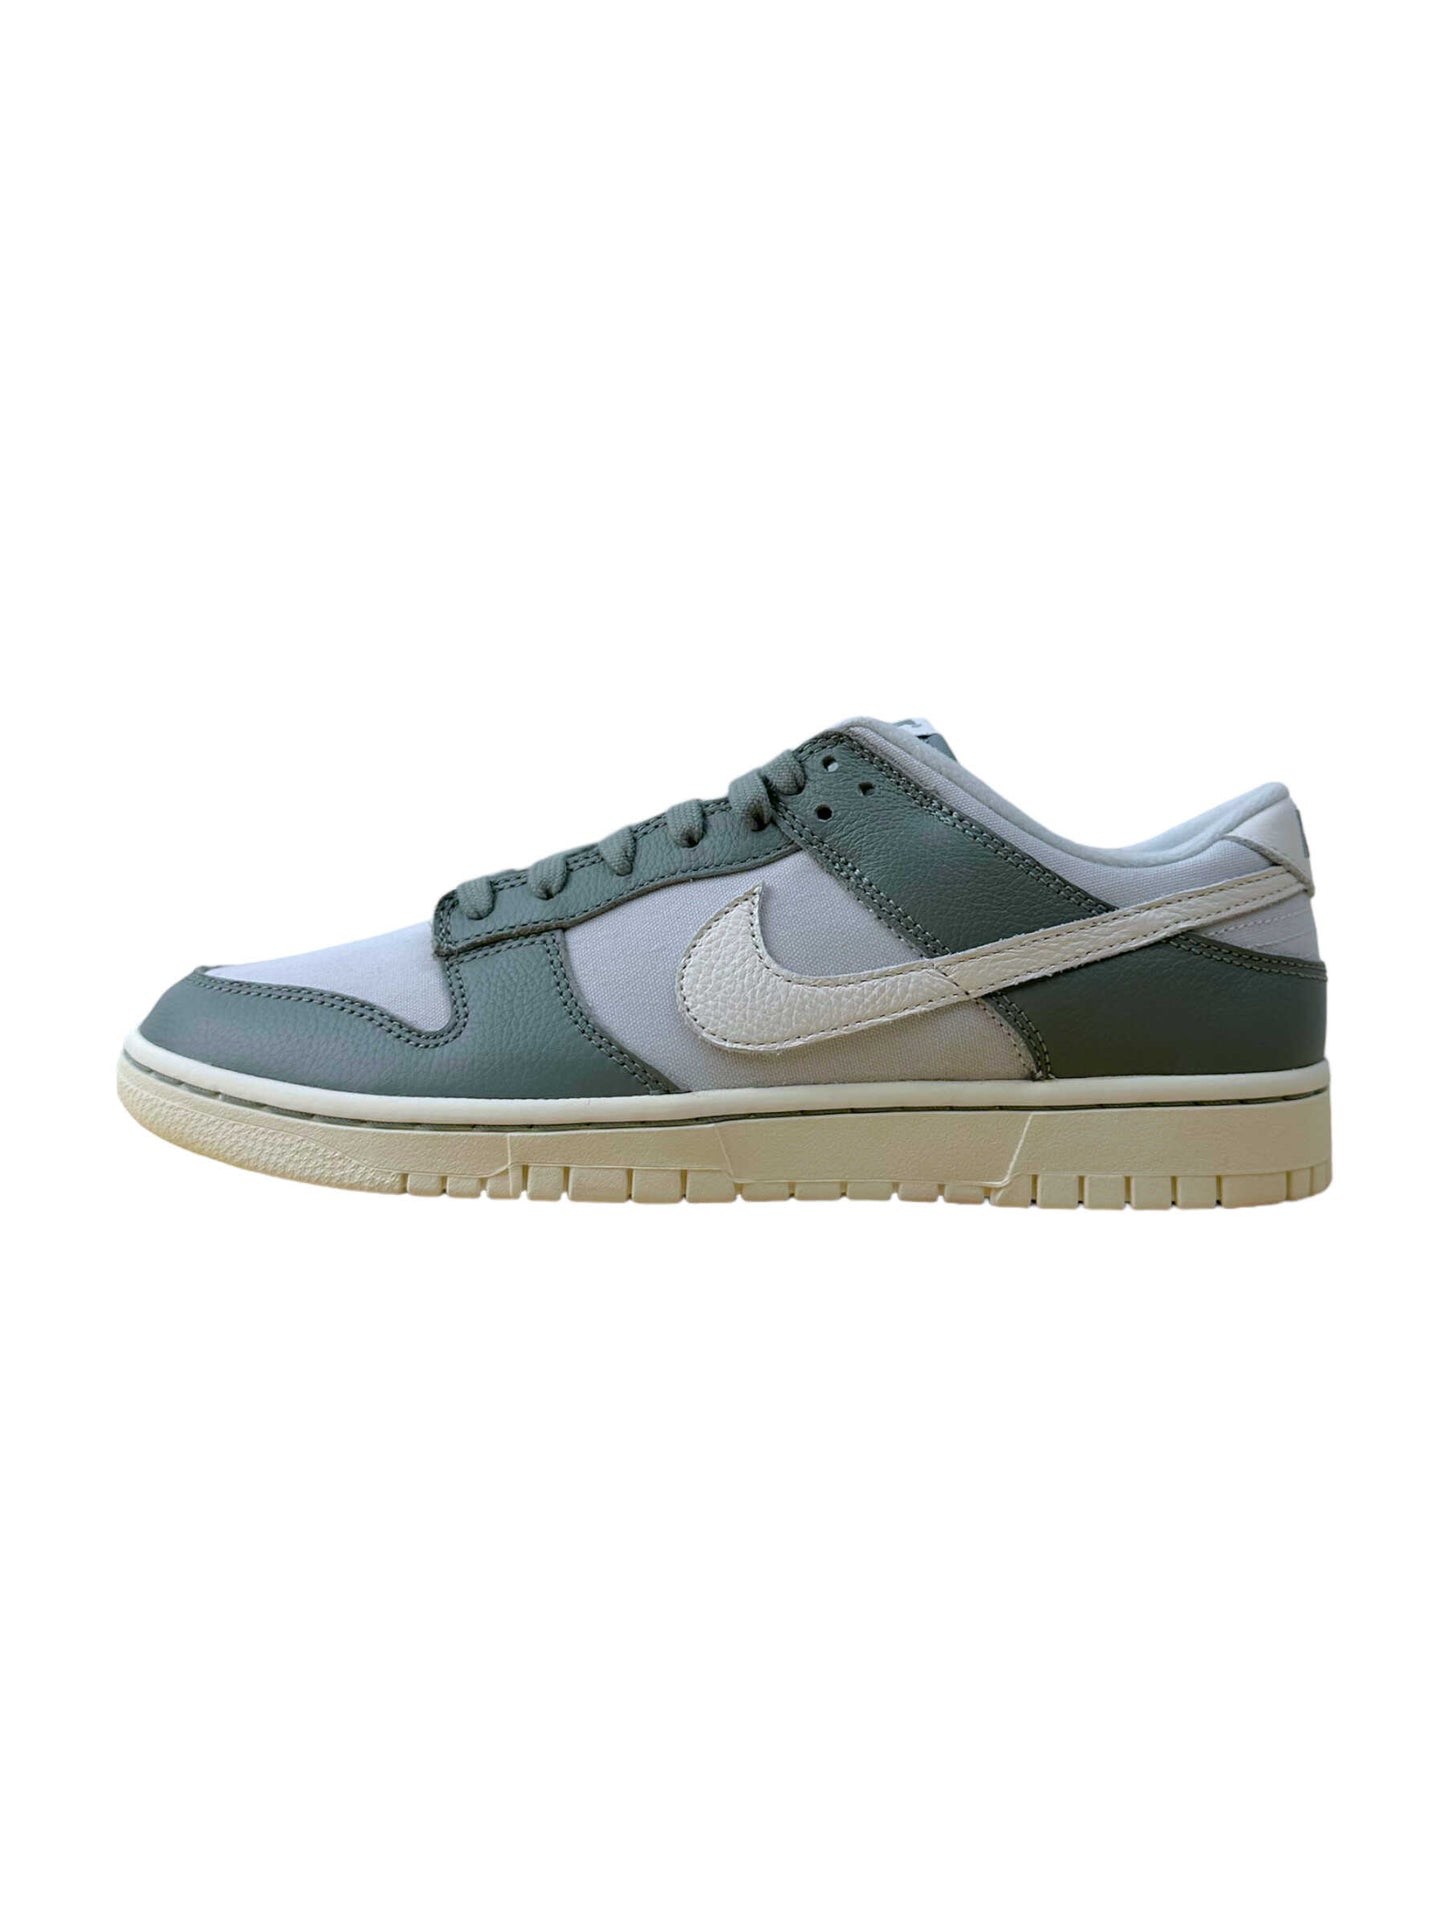 Nike Dunk Low Retro Premium Mica Green Sneakers - Genuine Design Luxury Consignment for Men. New & Pre-Owned Clothing, Shoes, & Accessories. Calgary, Canada